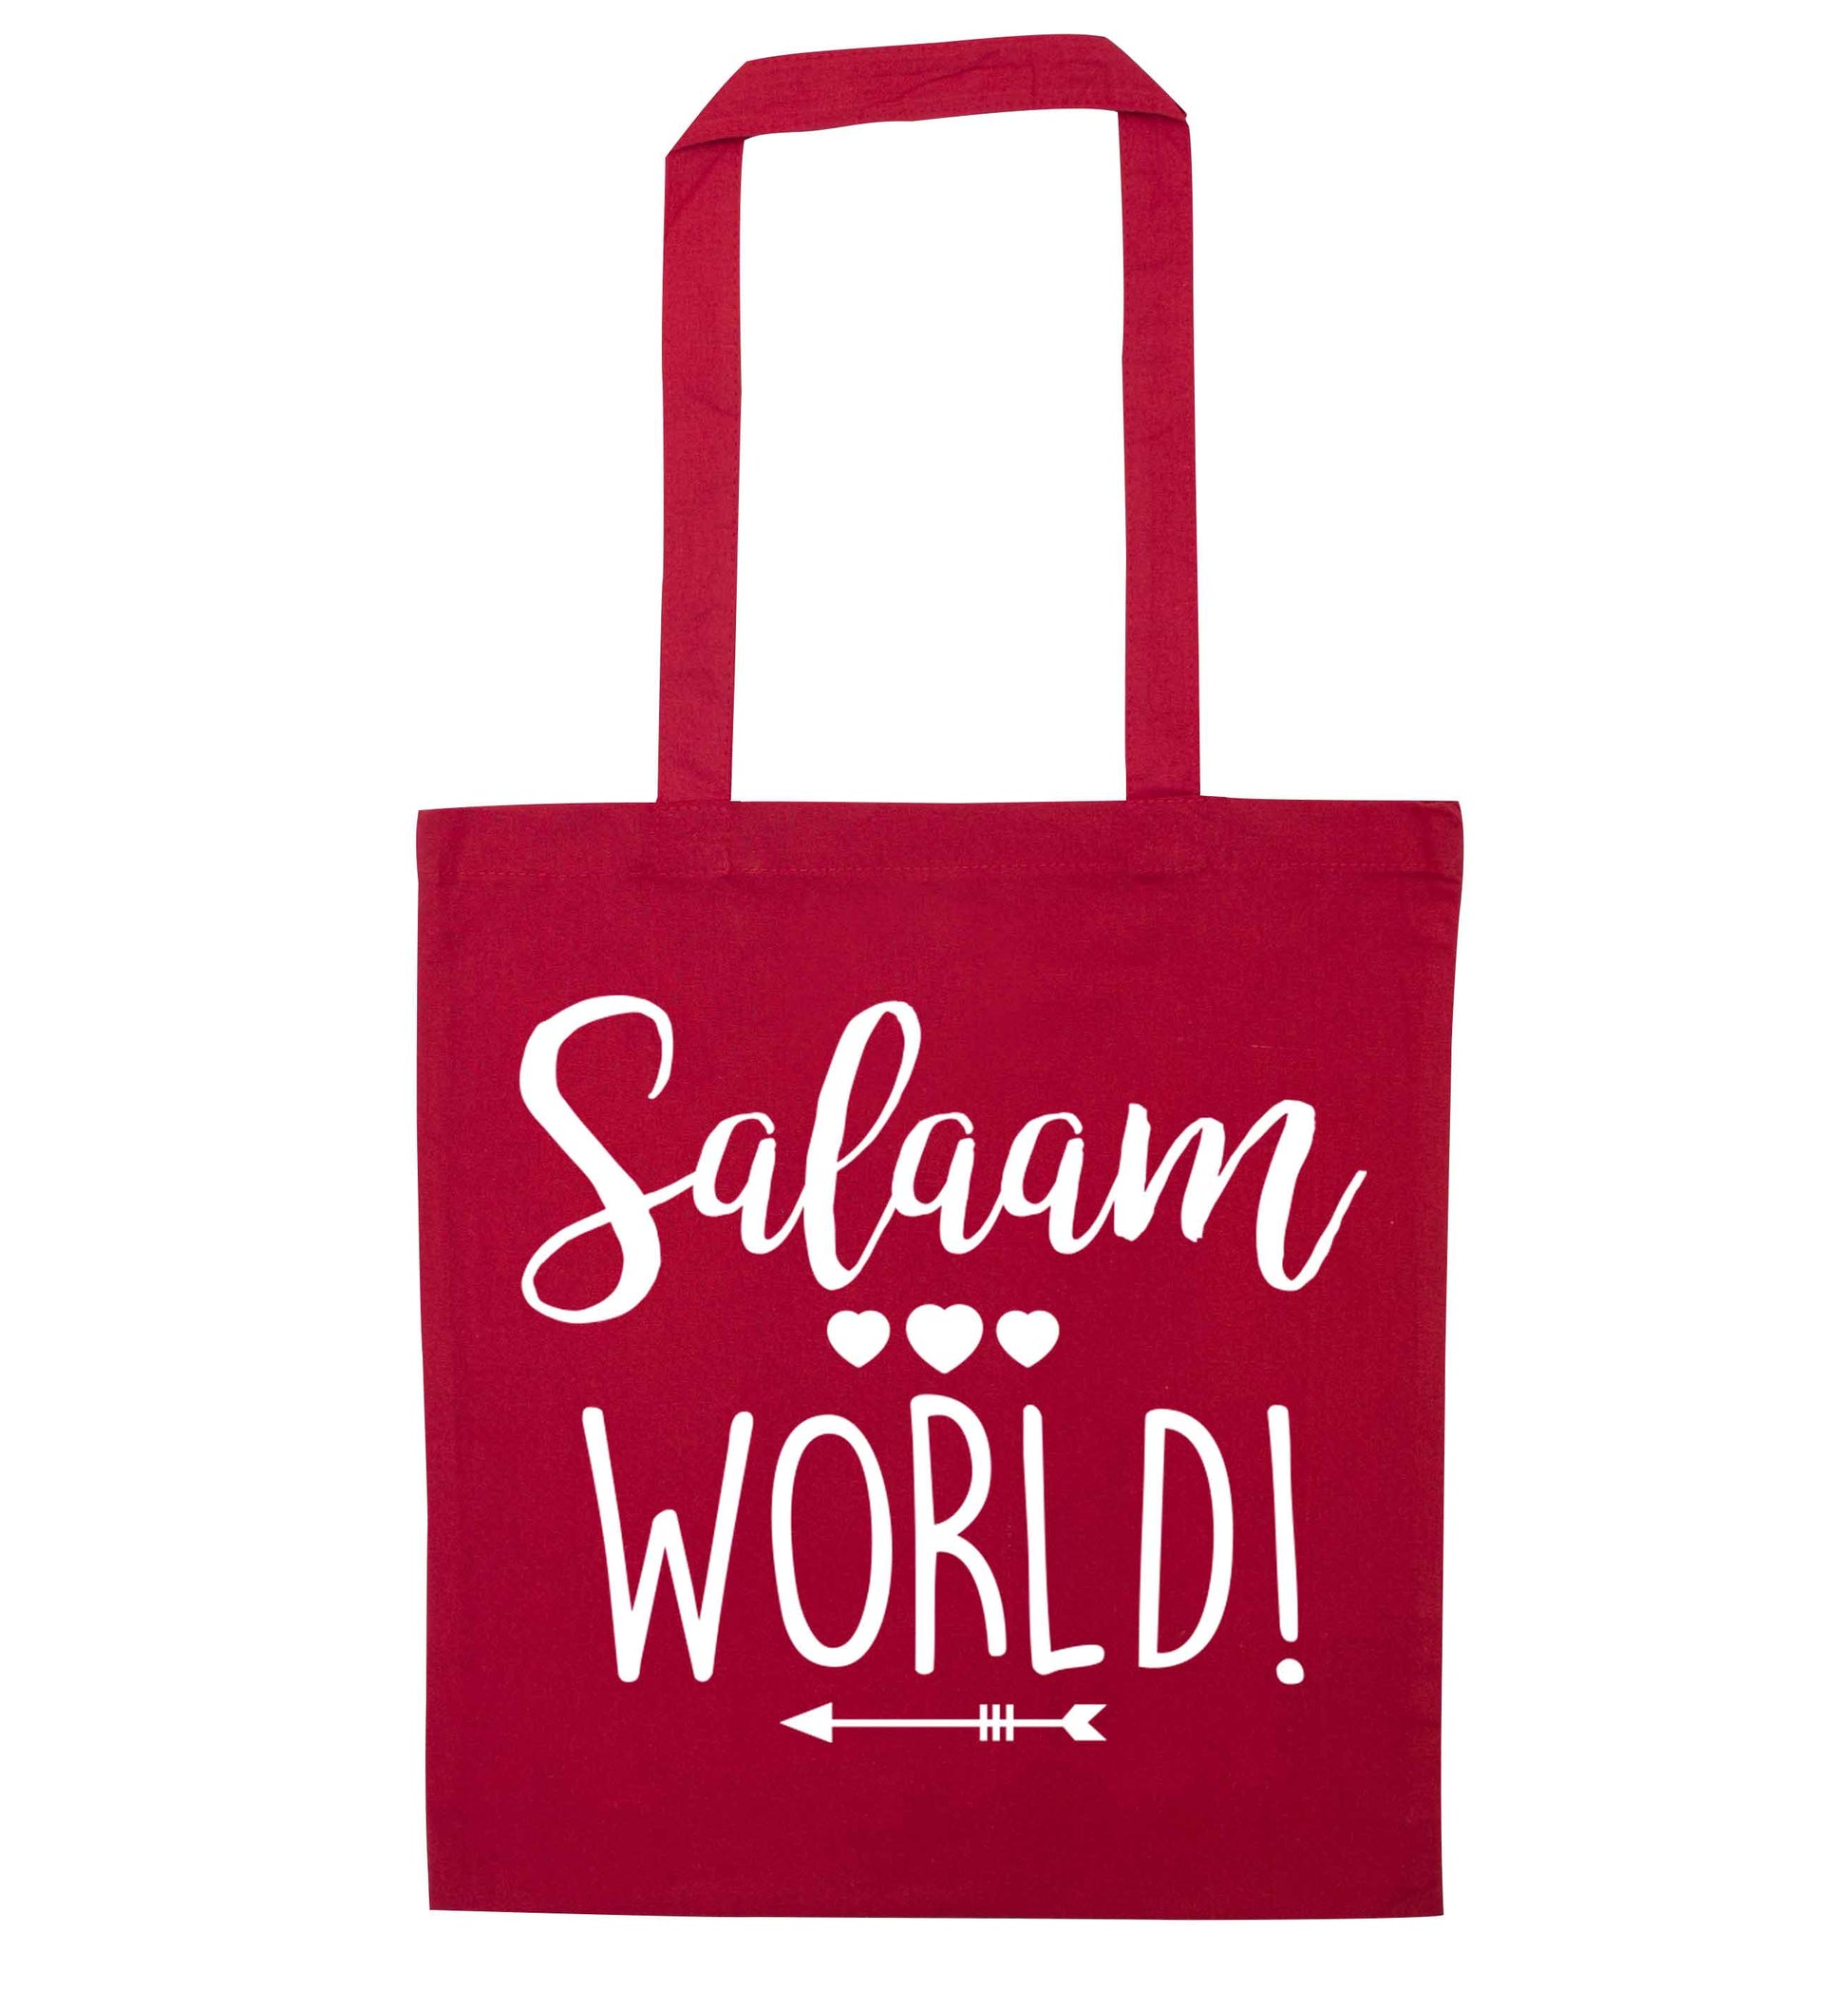 Salaam world red tote bag